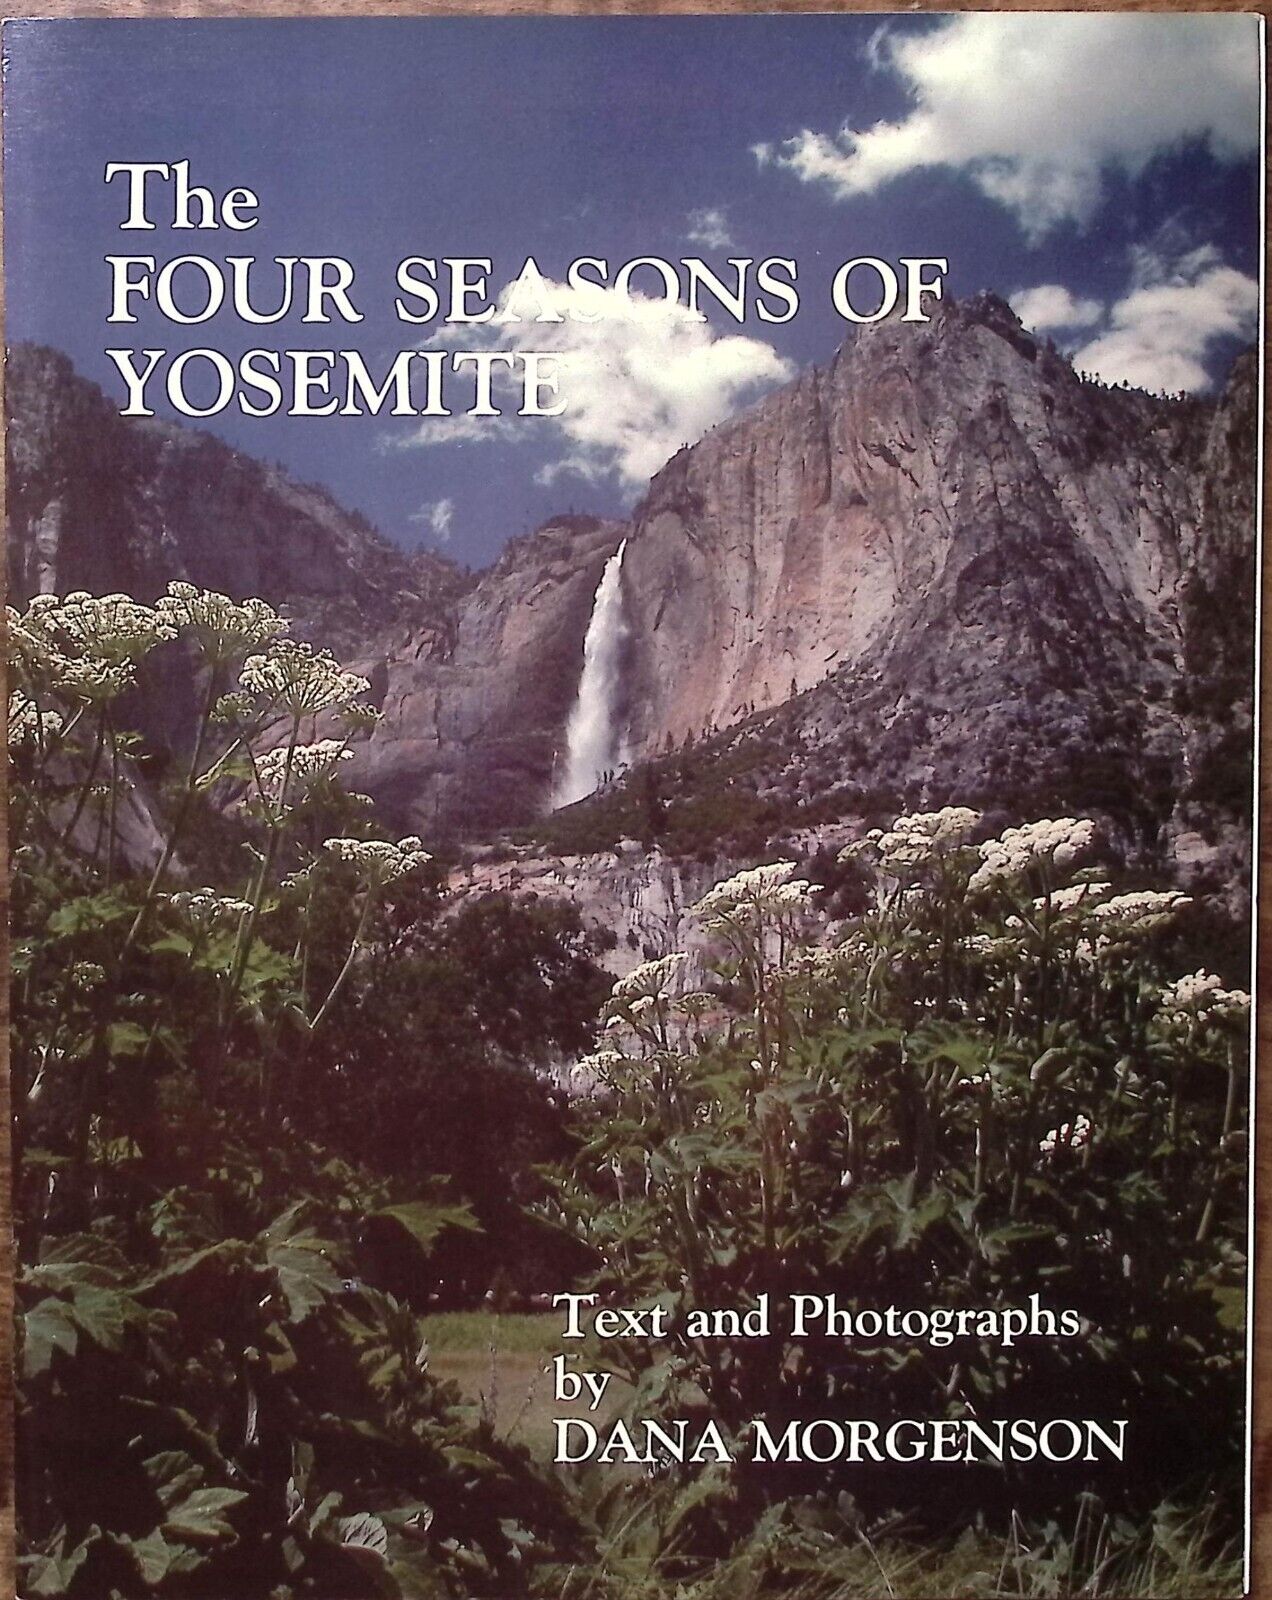 1978 THE FOUR SESONS OF YOSEMITE DANA MORGENSON 40 PAGES PHOTOGRAPHS EXC B926